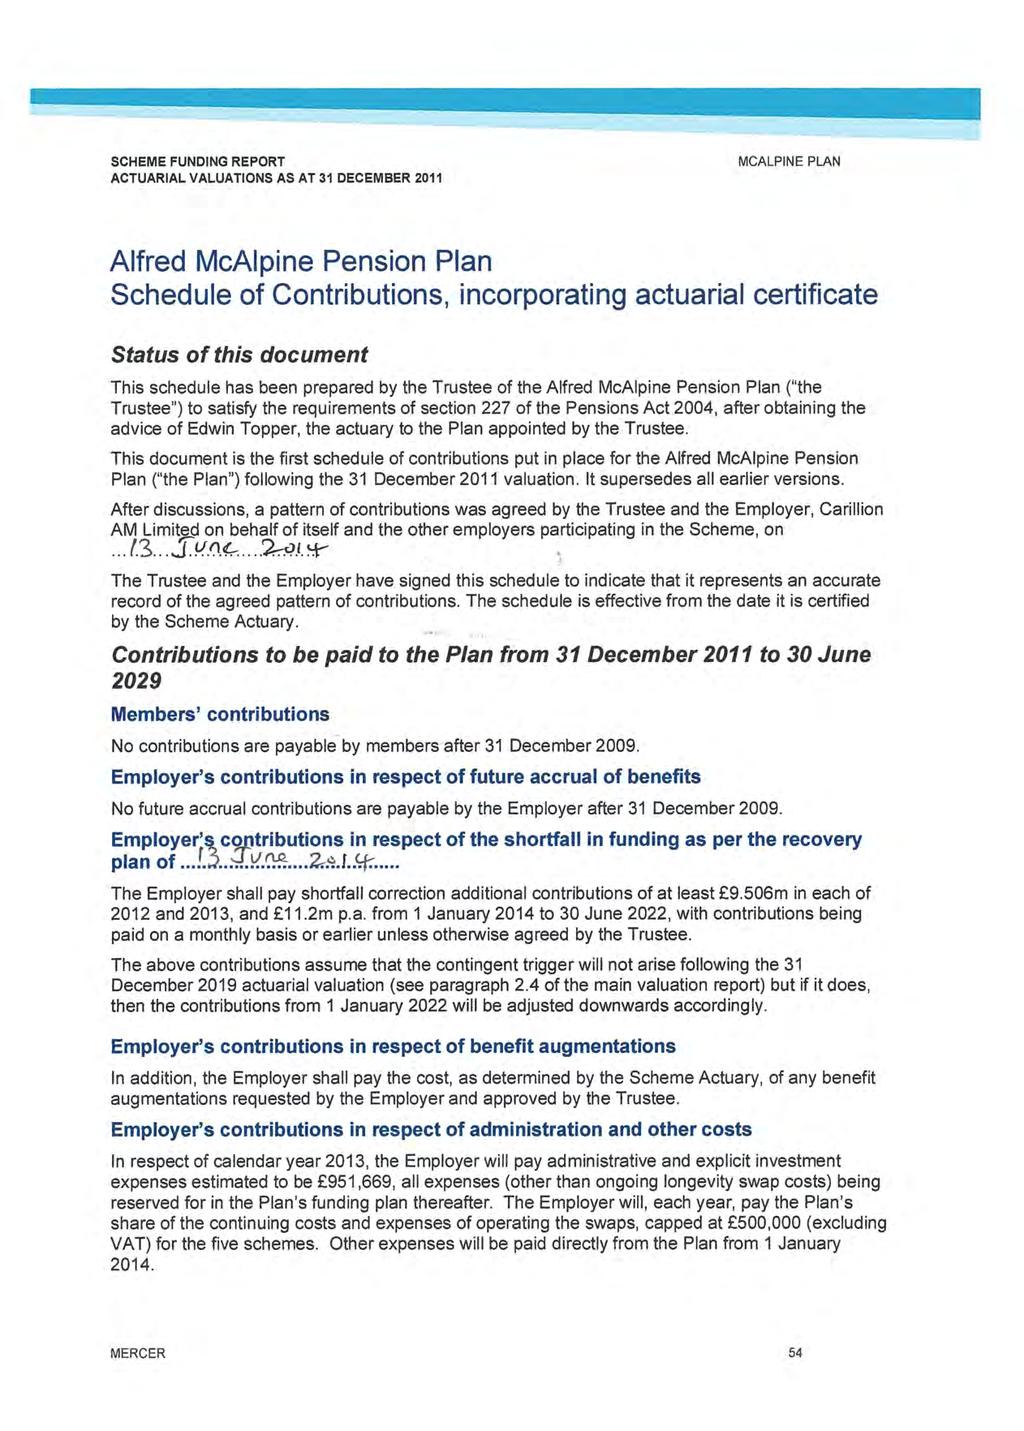 MCALPINE PLAN Alfred McAlpine Pension Plan Schedule of Contributions, incorporating actuarial certificate Status of this document This schedule has been prepared by the Trustee of the Alfred McAlpine